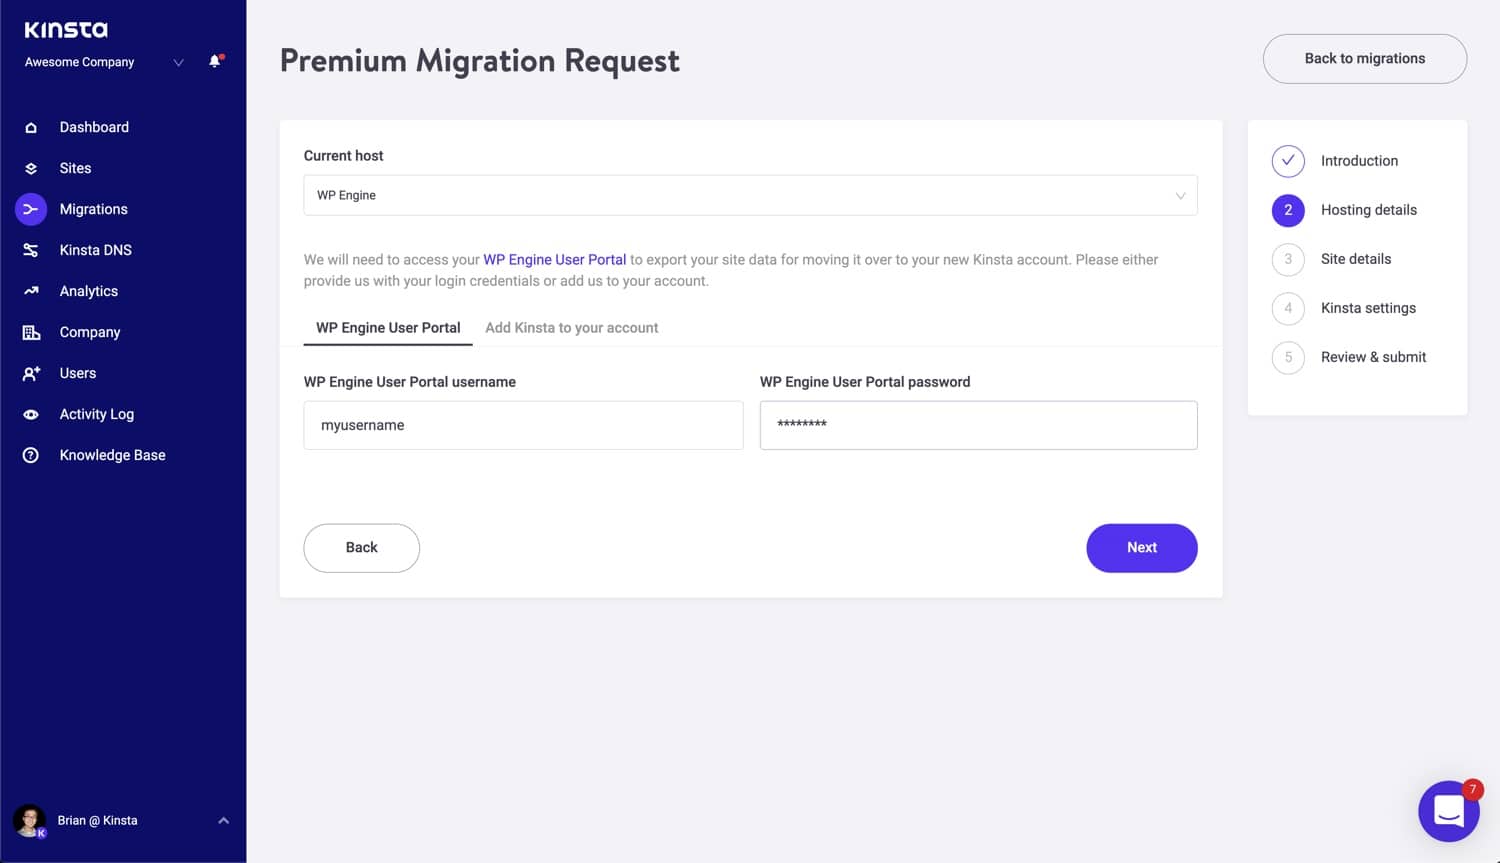 Add your current hosting details to your migration request.